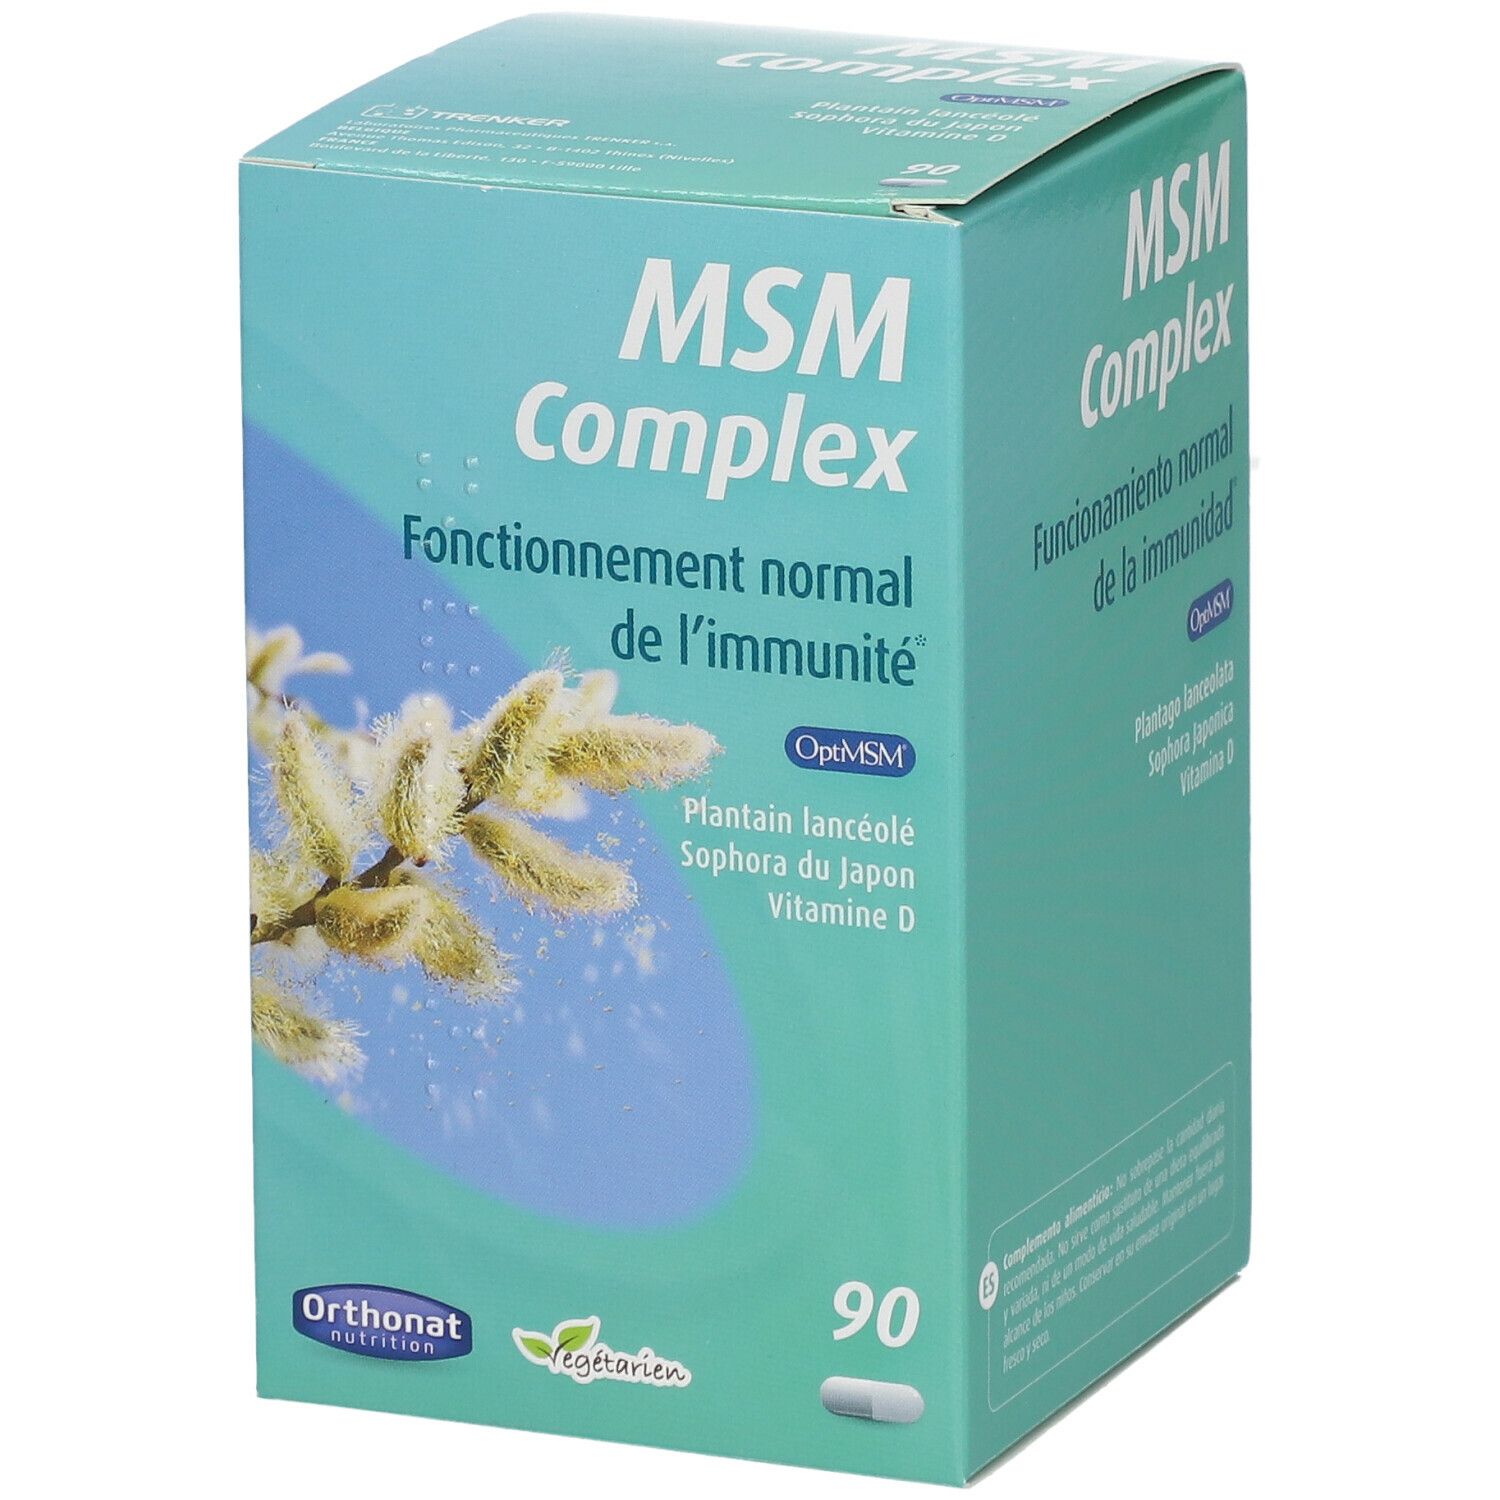 Image of Orthonat nutrition MSM Complex